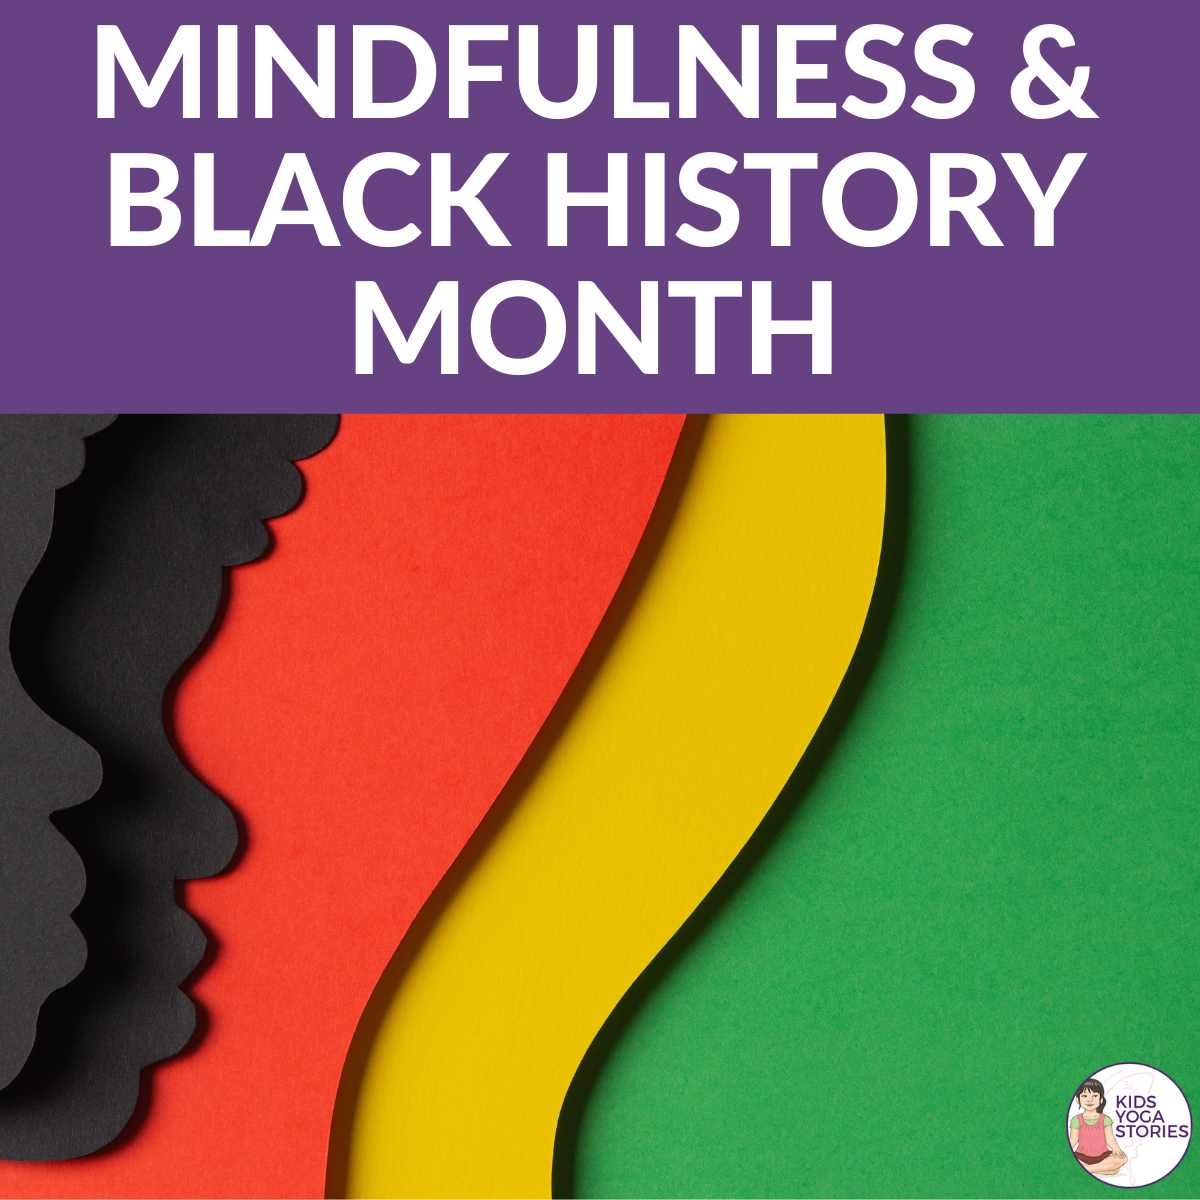 Books and Affirmations for Black History Month | Kids Yoga Stories